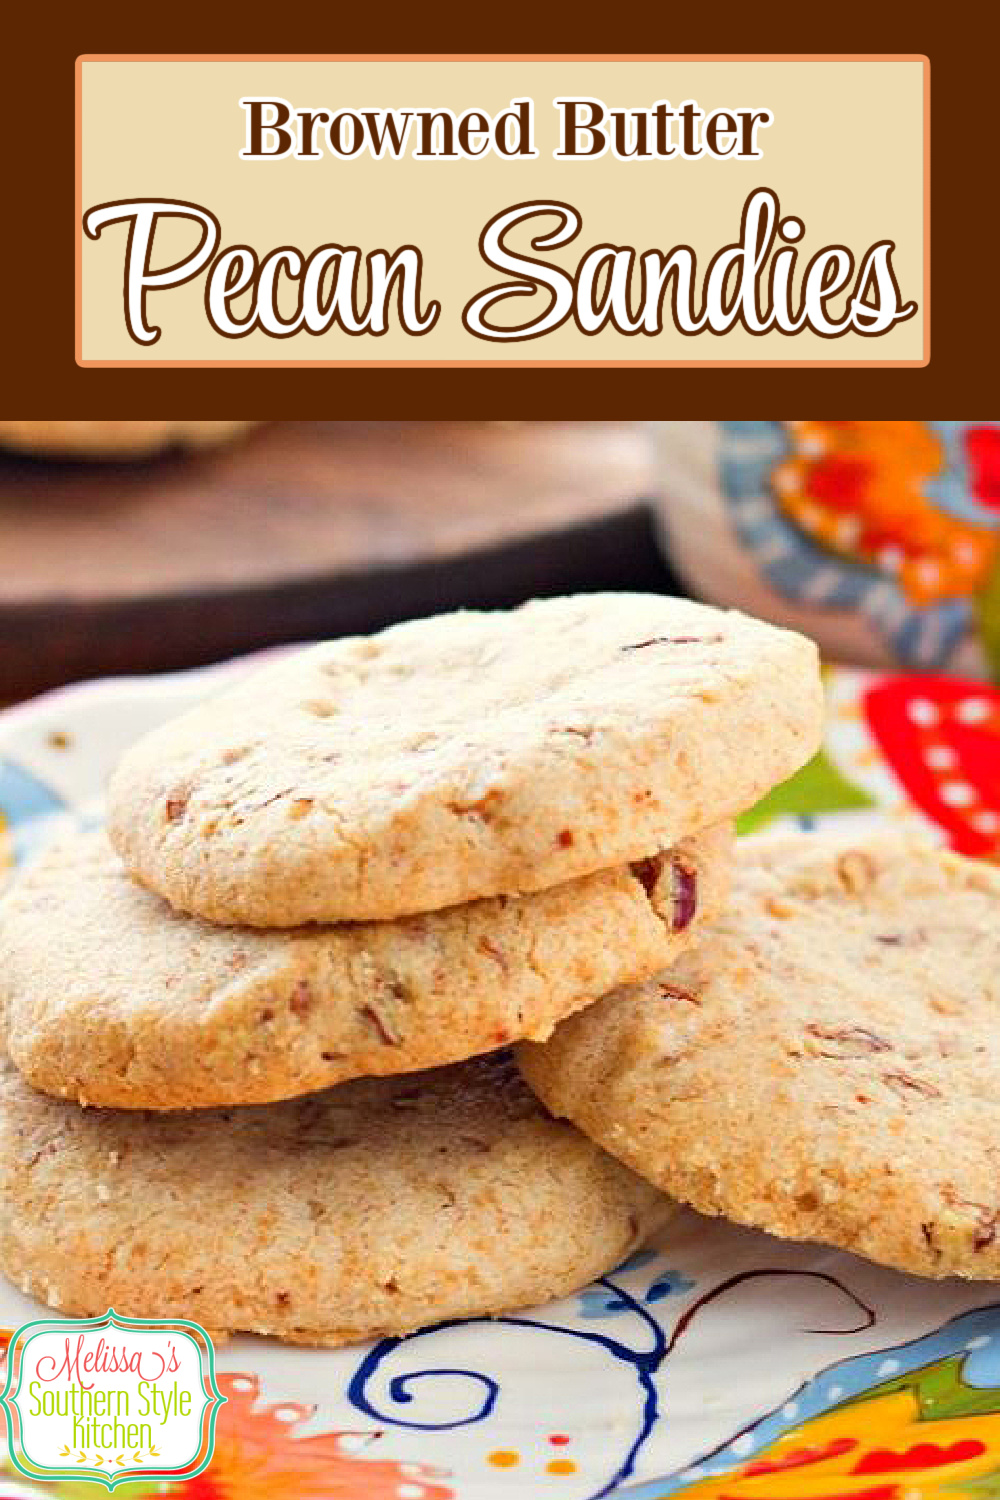 These buttery shortbread cookies are filled with the nutty flavor of browned butter and toasted pecans #pecancookies #pecansandies #shortbreadcookies #cookies #cookierecipes #desserts #dessertfoodrecipes #southernfood #southernrecipes #holidaybaking #christmascookies via @melissasssk